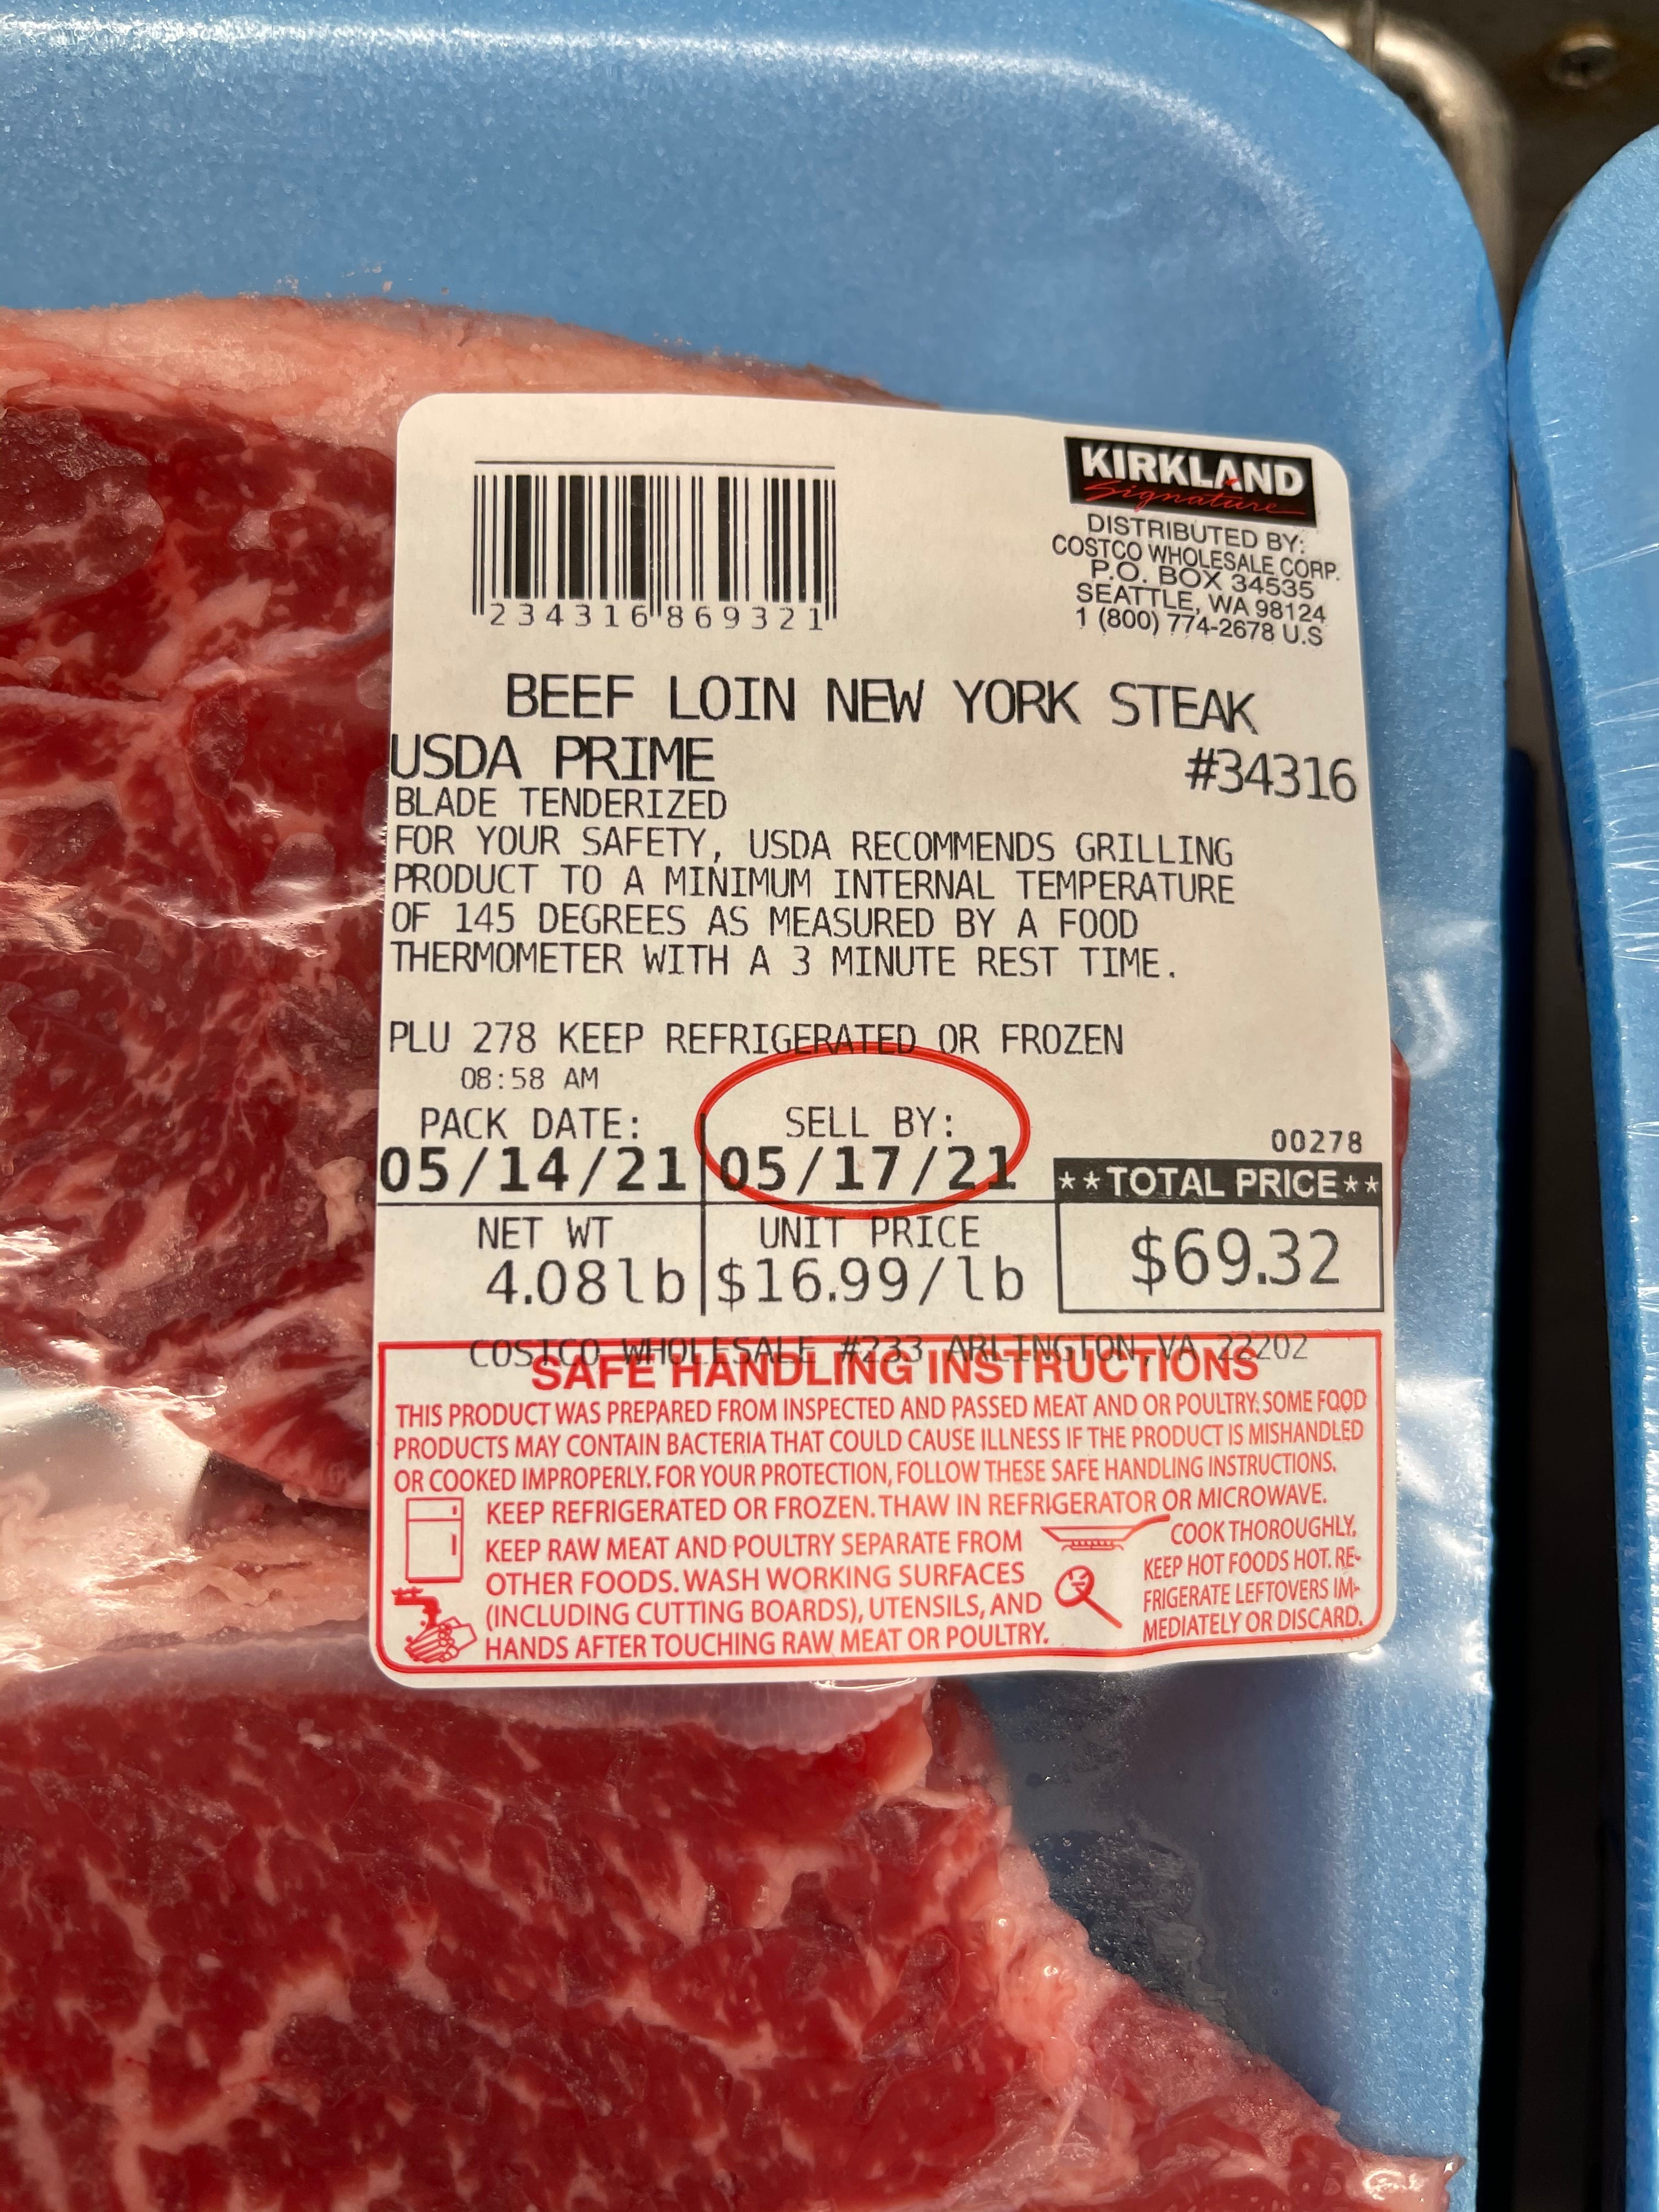 Discounted Meat Options